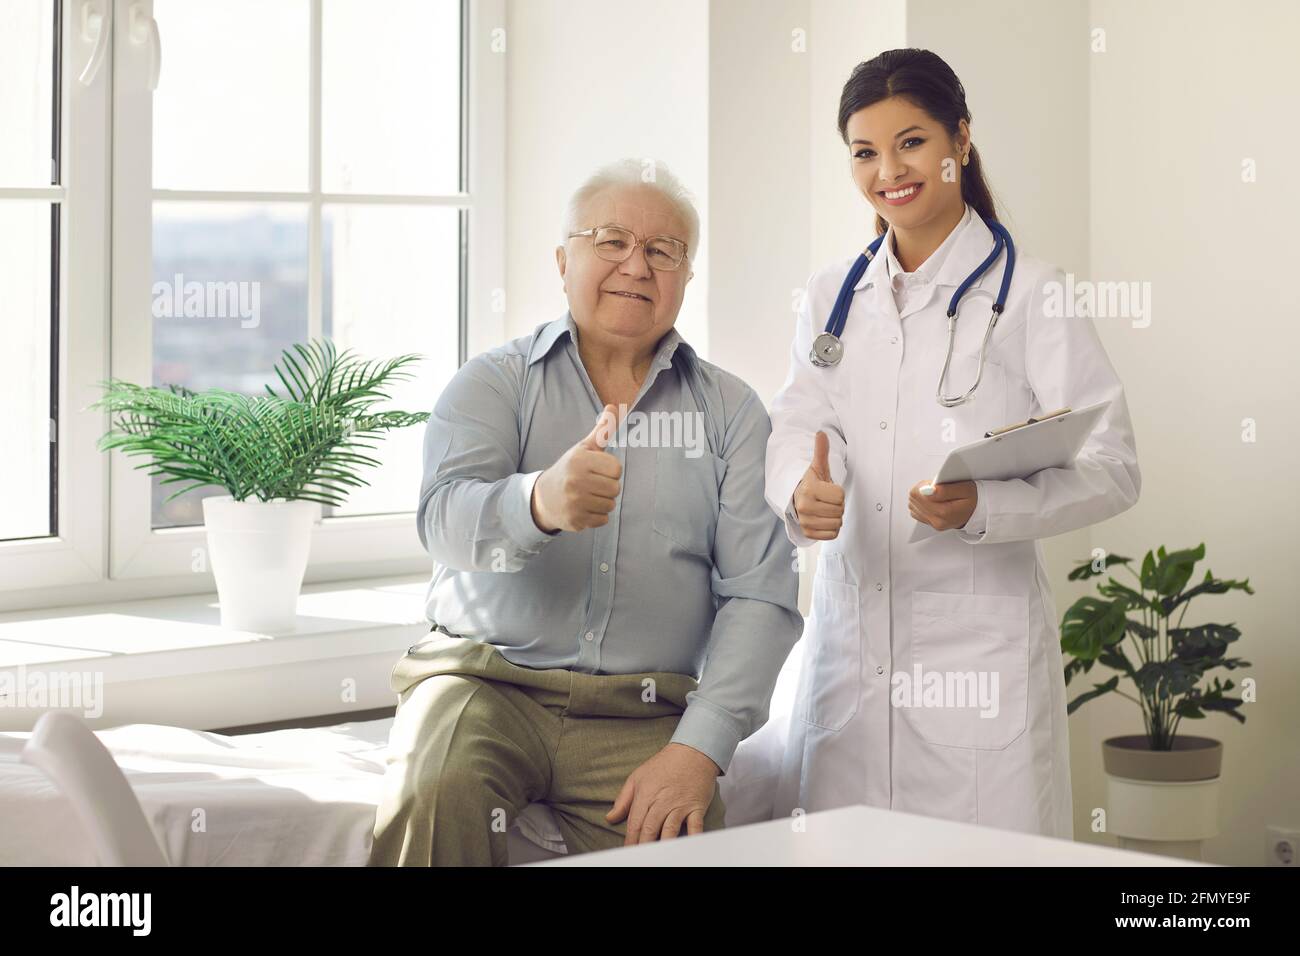 Portrait of happy satisfied senior man and young doctor giving thumbs up together Stock Photo